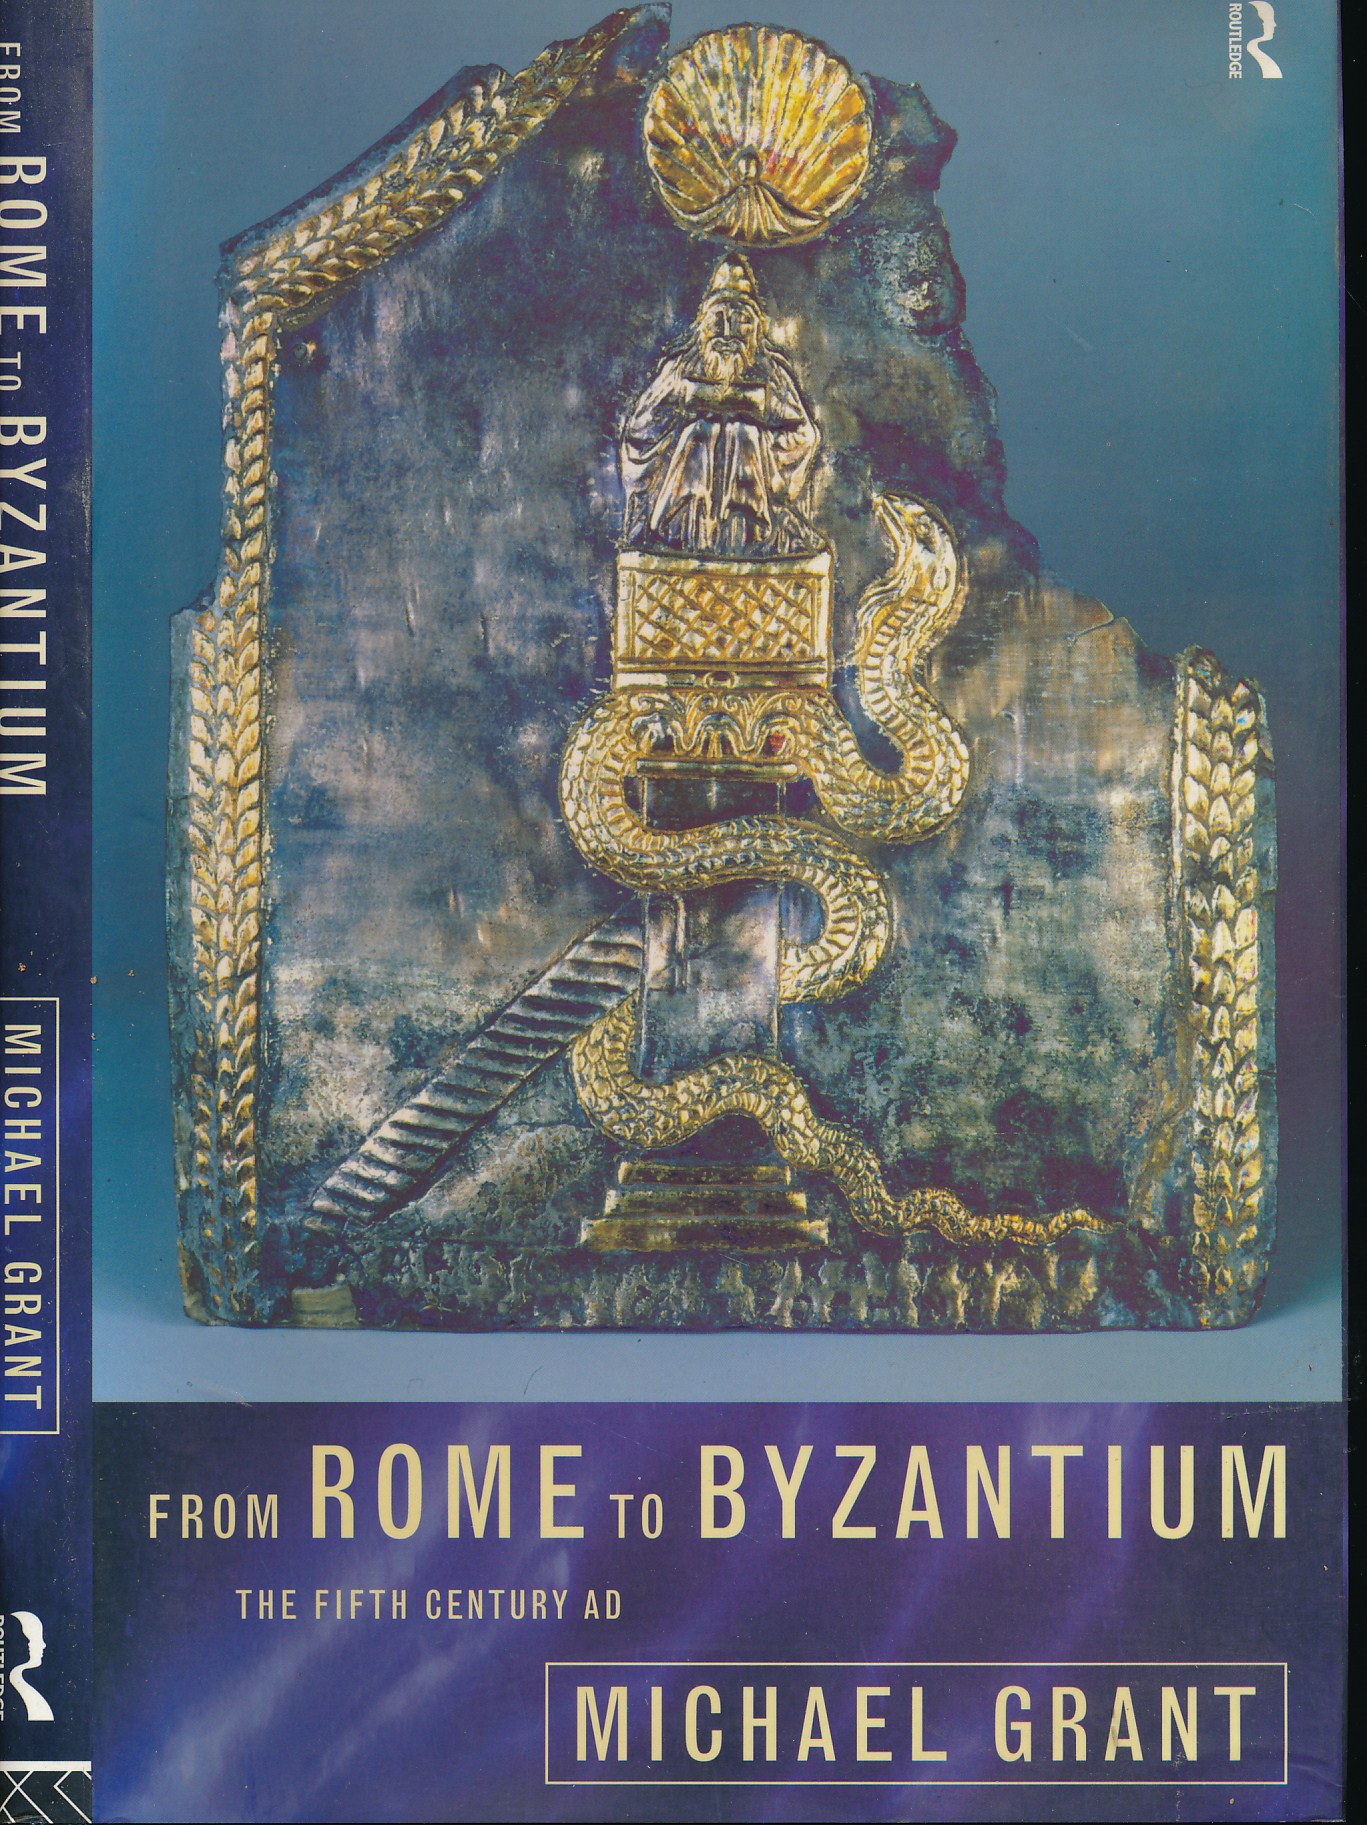 From Rome to Byzantum. The Fifth Century AD